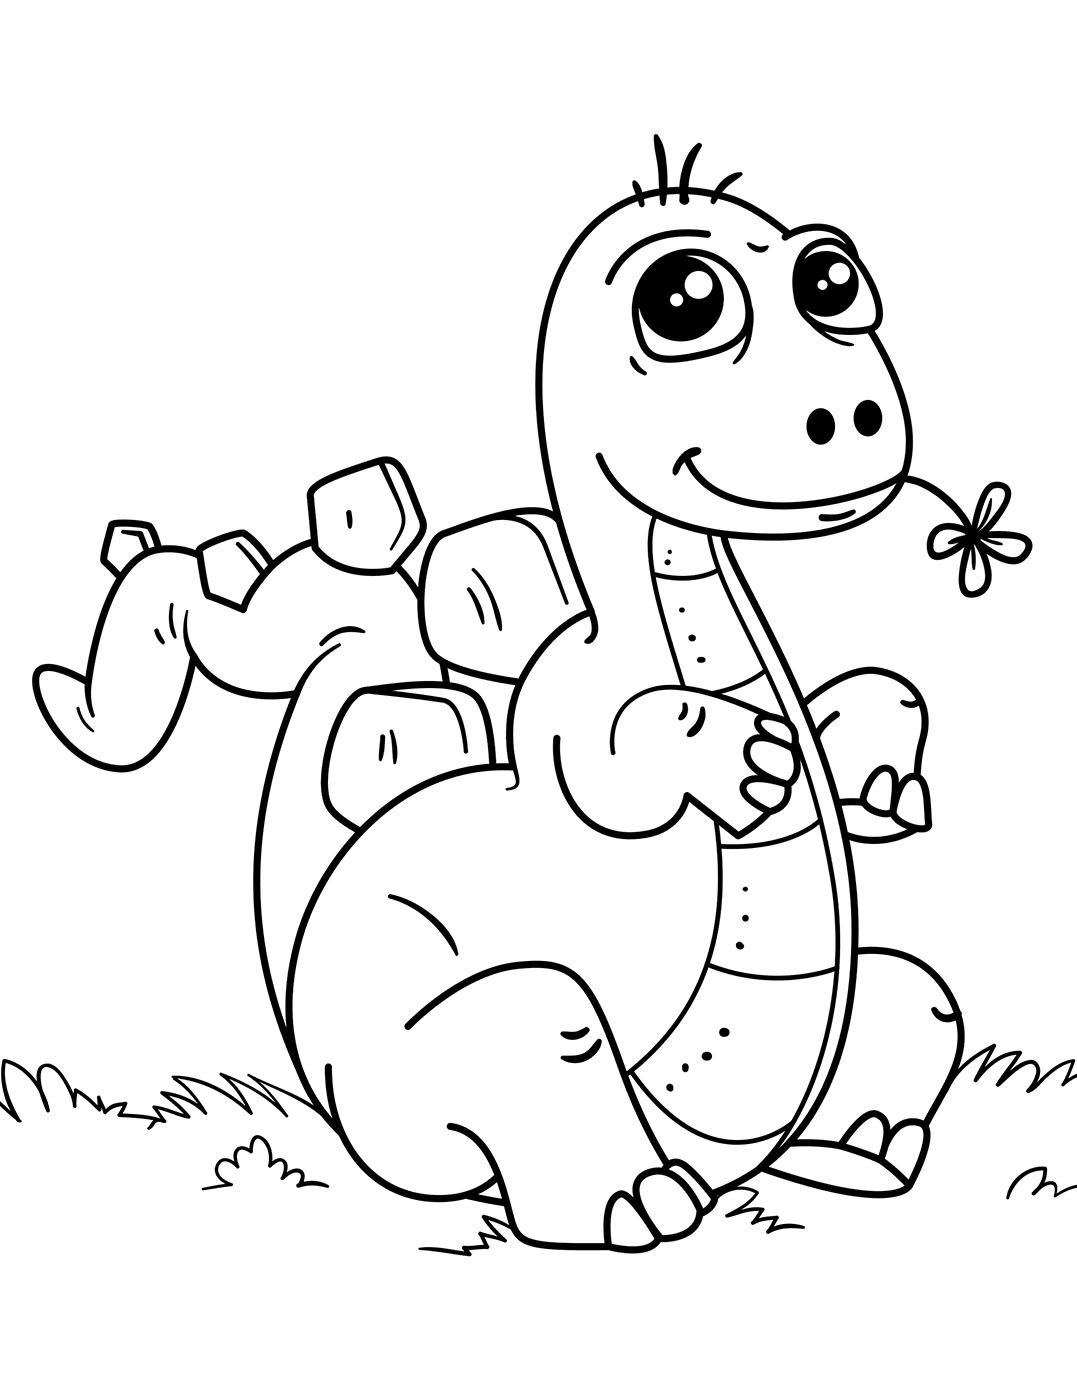 Download Dinosaurs to color for kids : Ba - Dinosaurs Kids Coloring ...